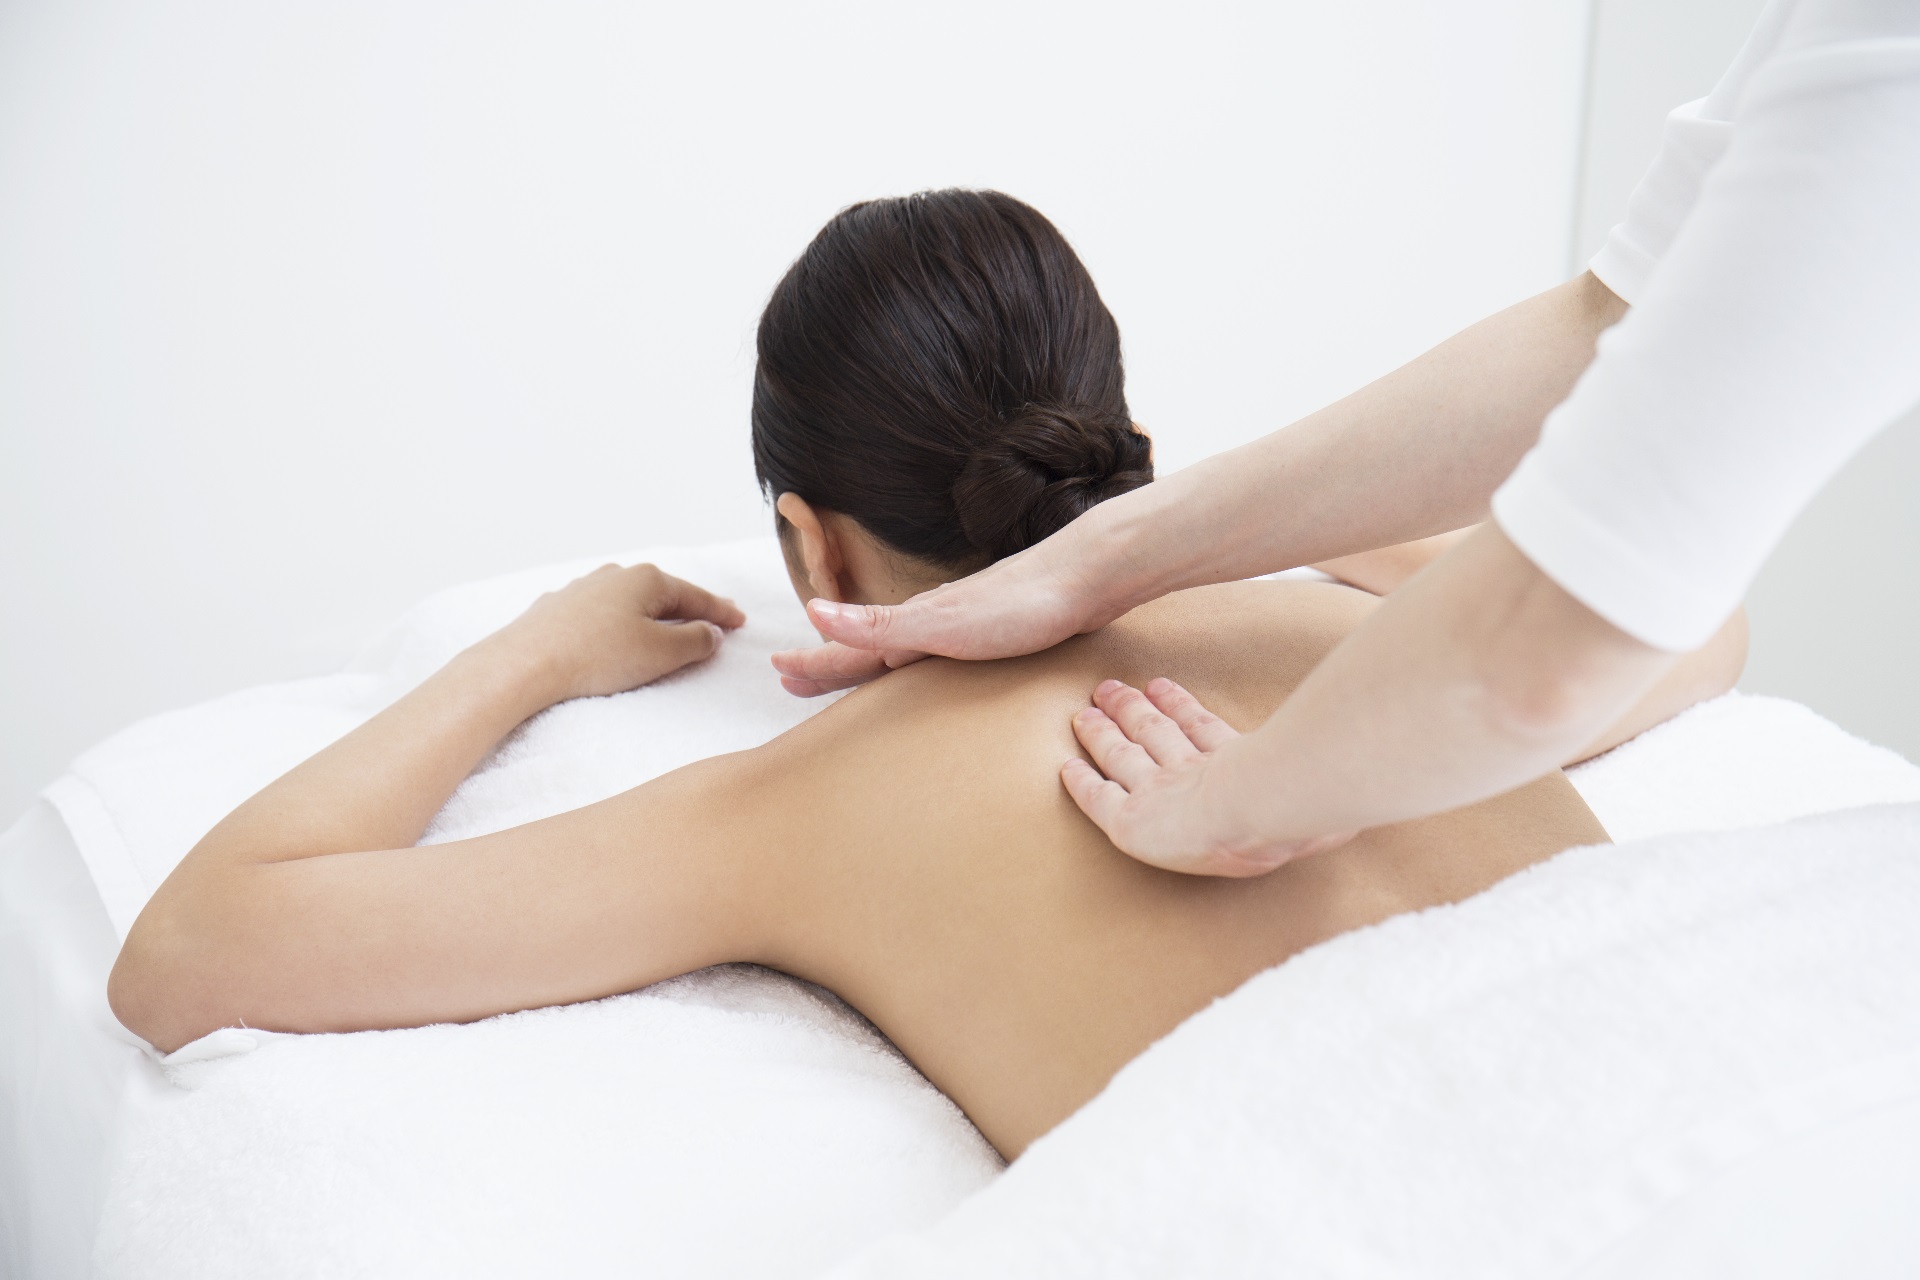 What To Expect During A Relaxation Massage